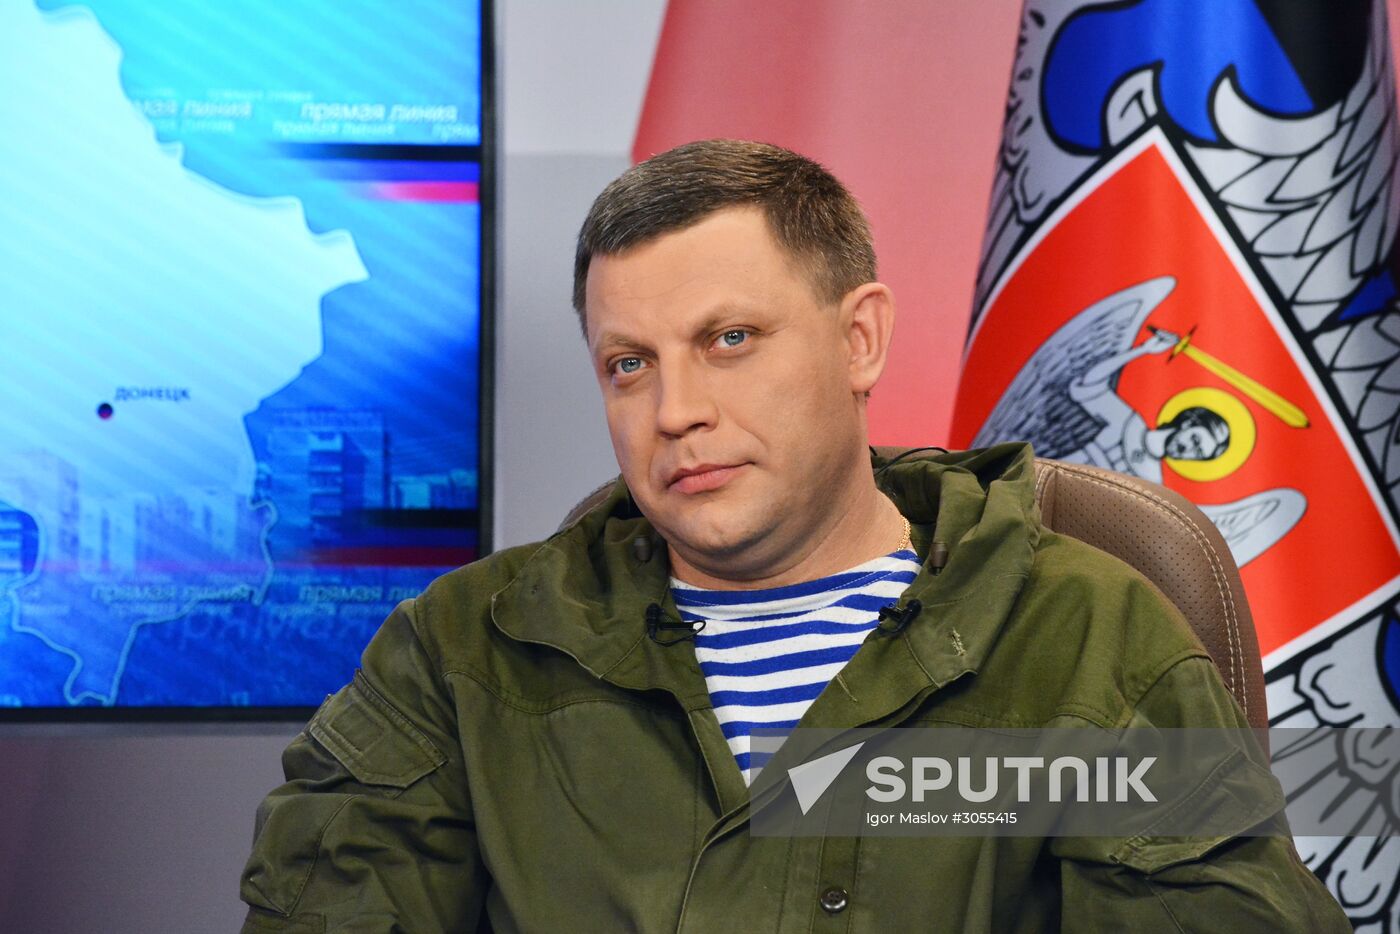 Alexander Zakharchenko holds televised Q&A session for residents in Ukraine-controlled Donbas areas